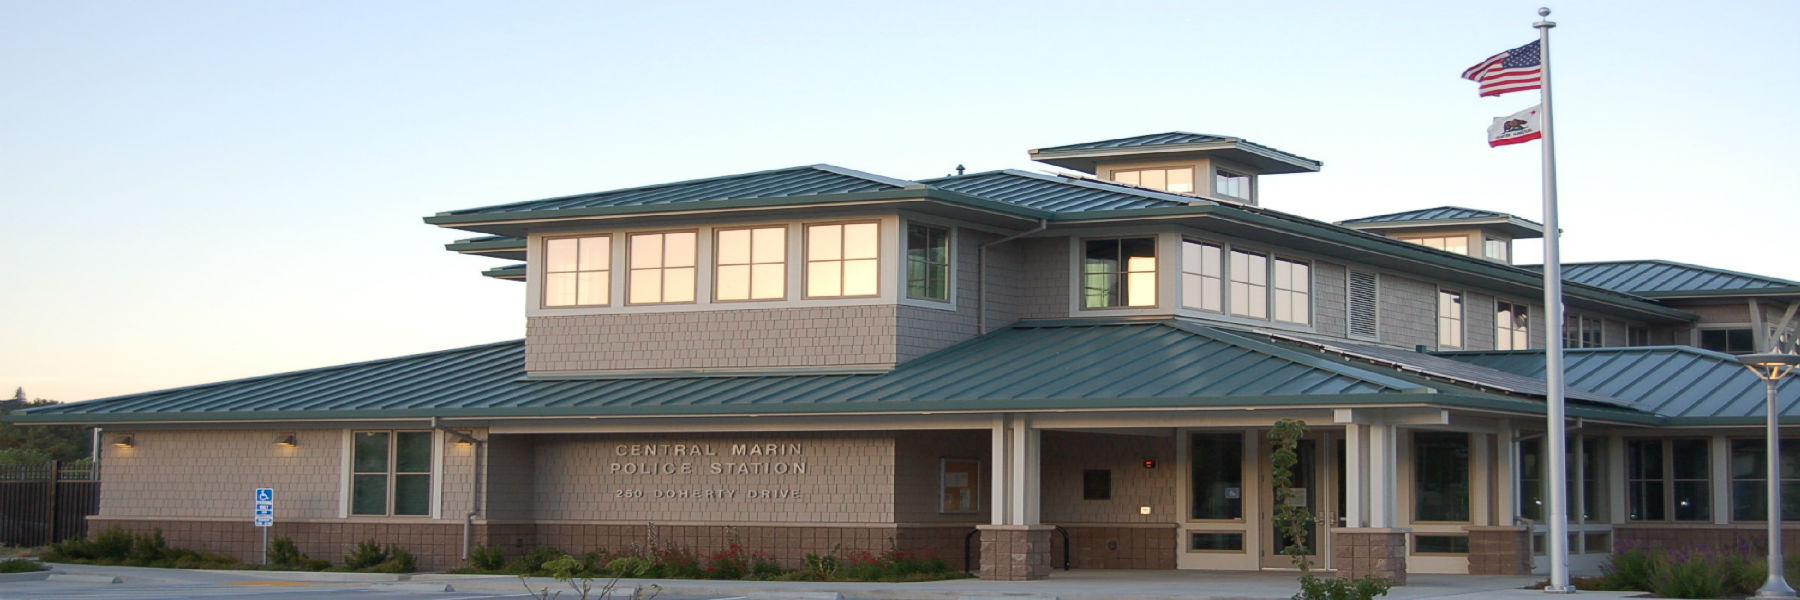 Central Marin Police Station